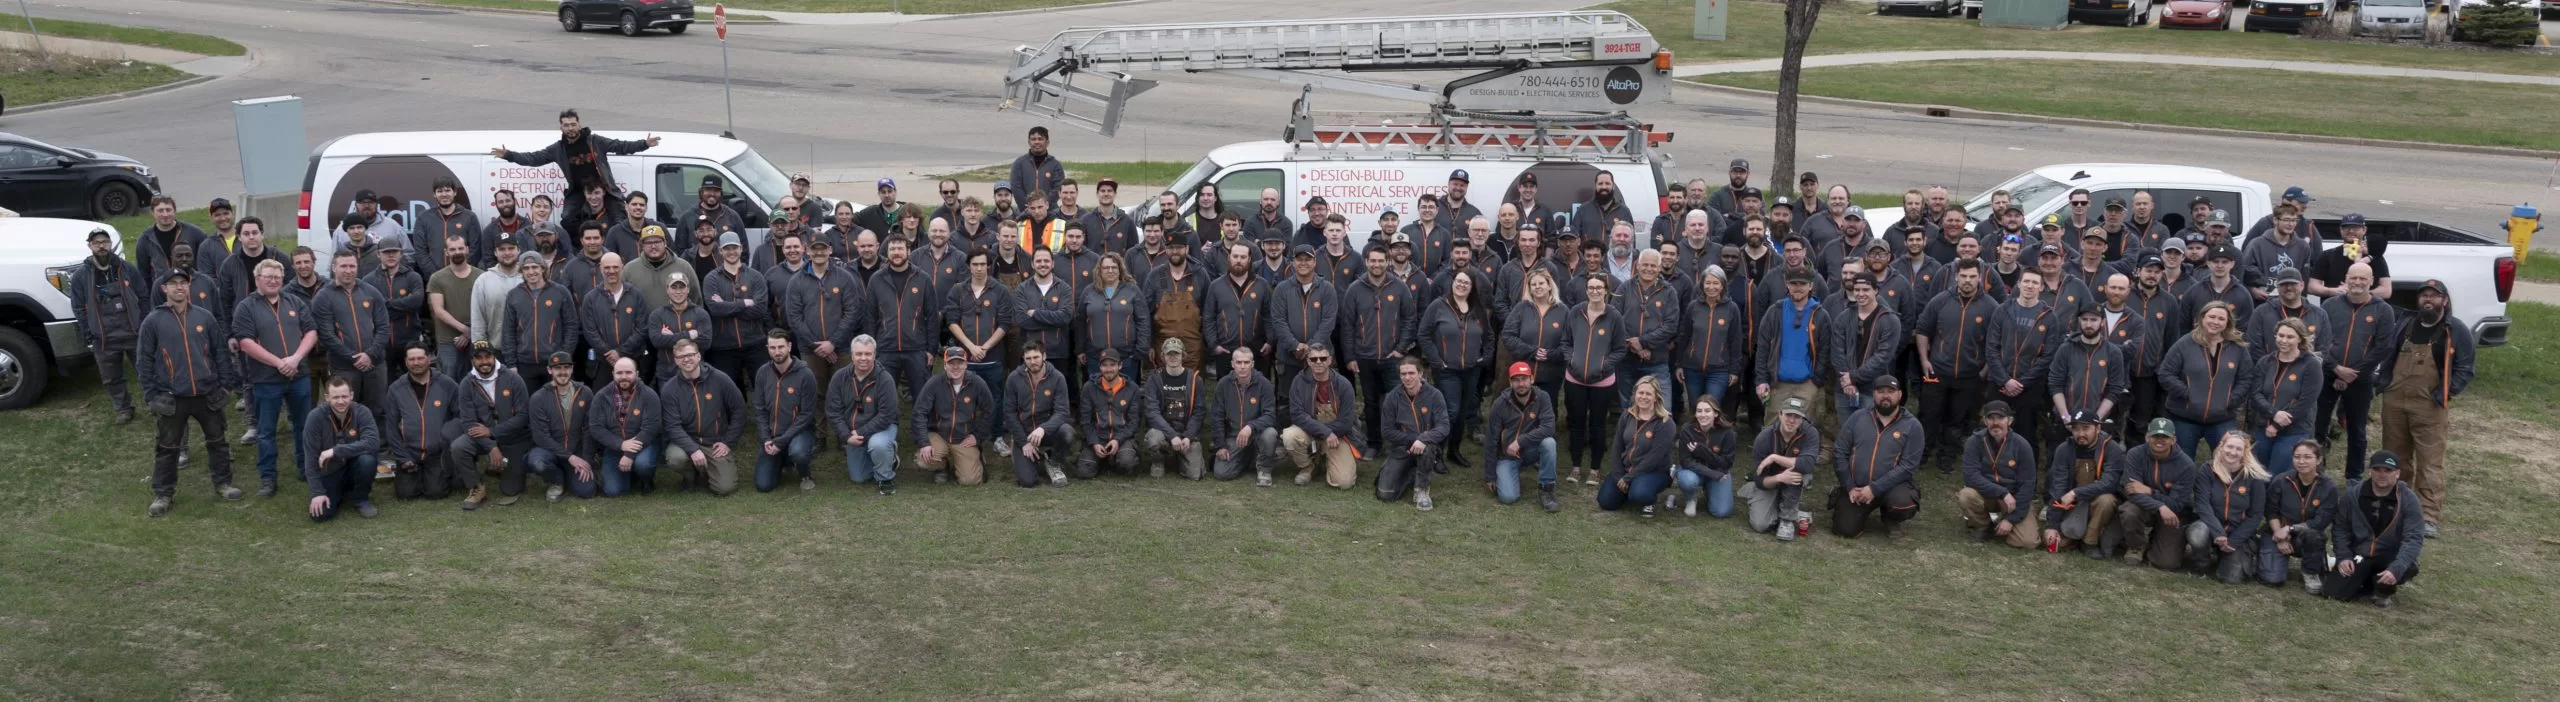 AltaPro Team Photo in 2022 with AltaPro trucks and service vehicles in Background